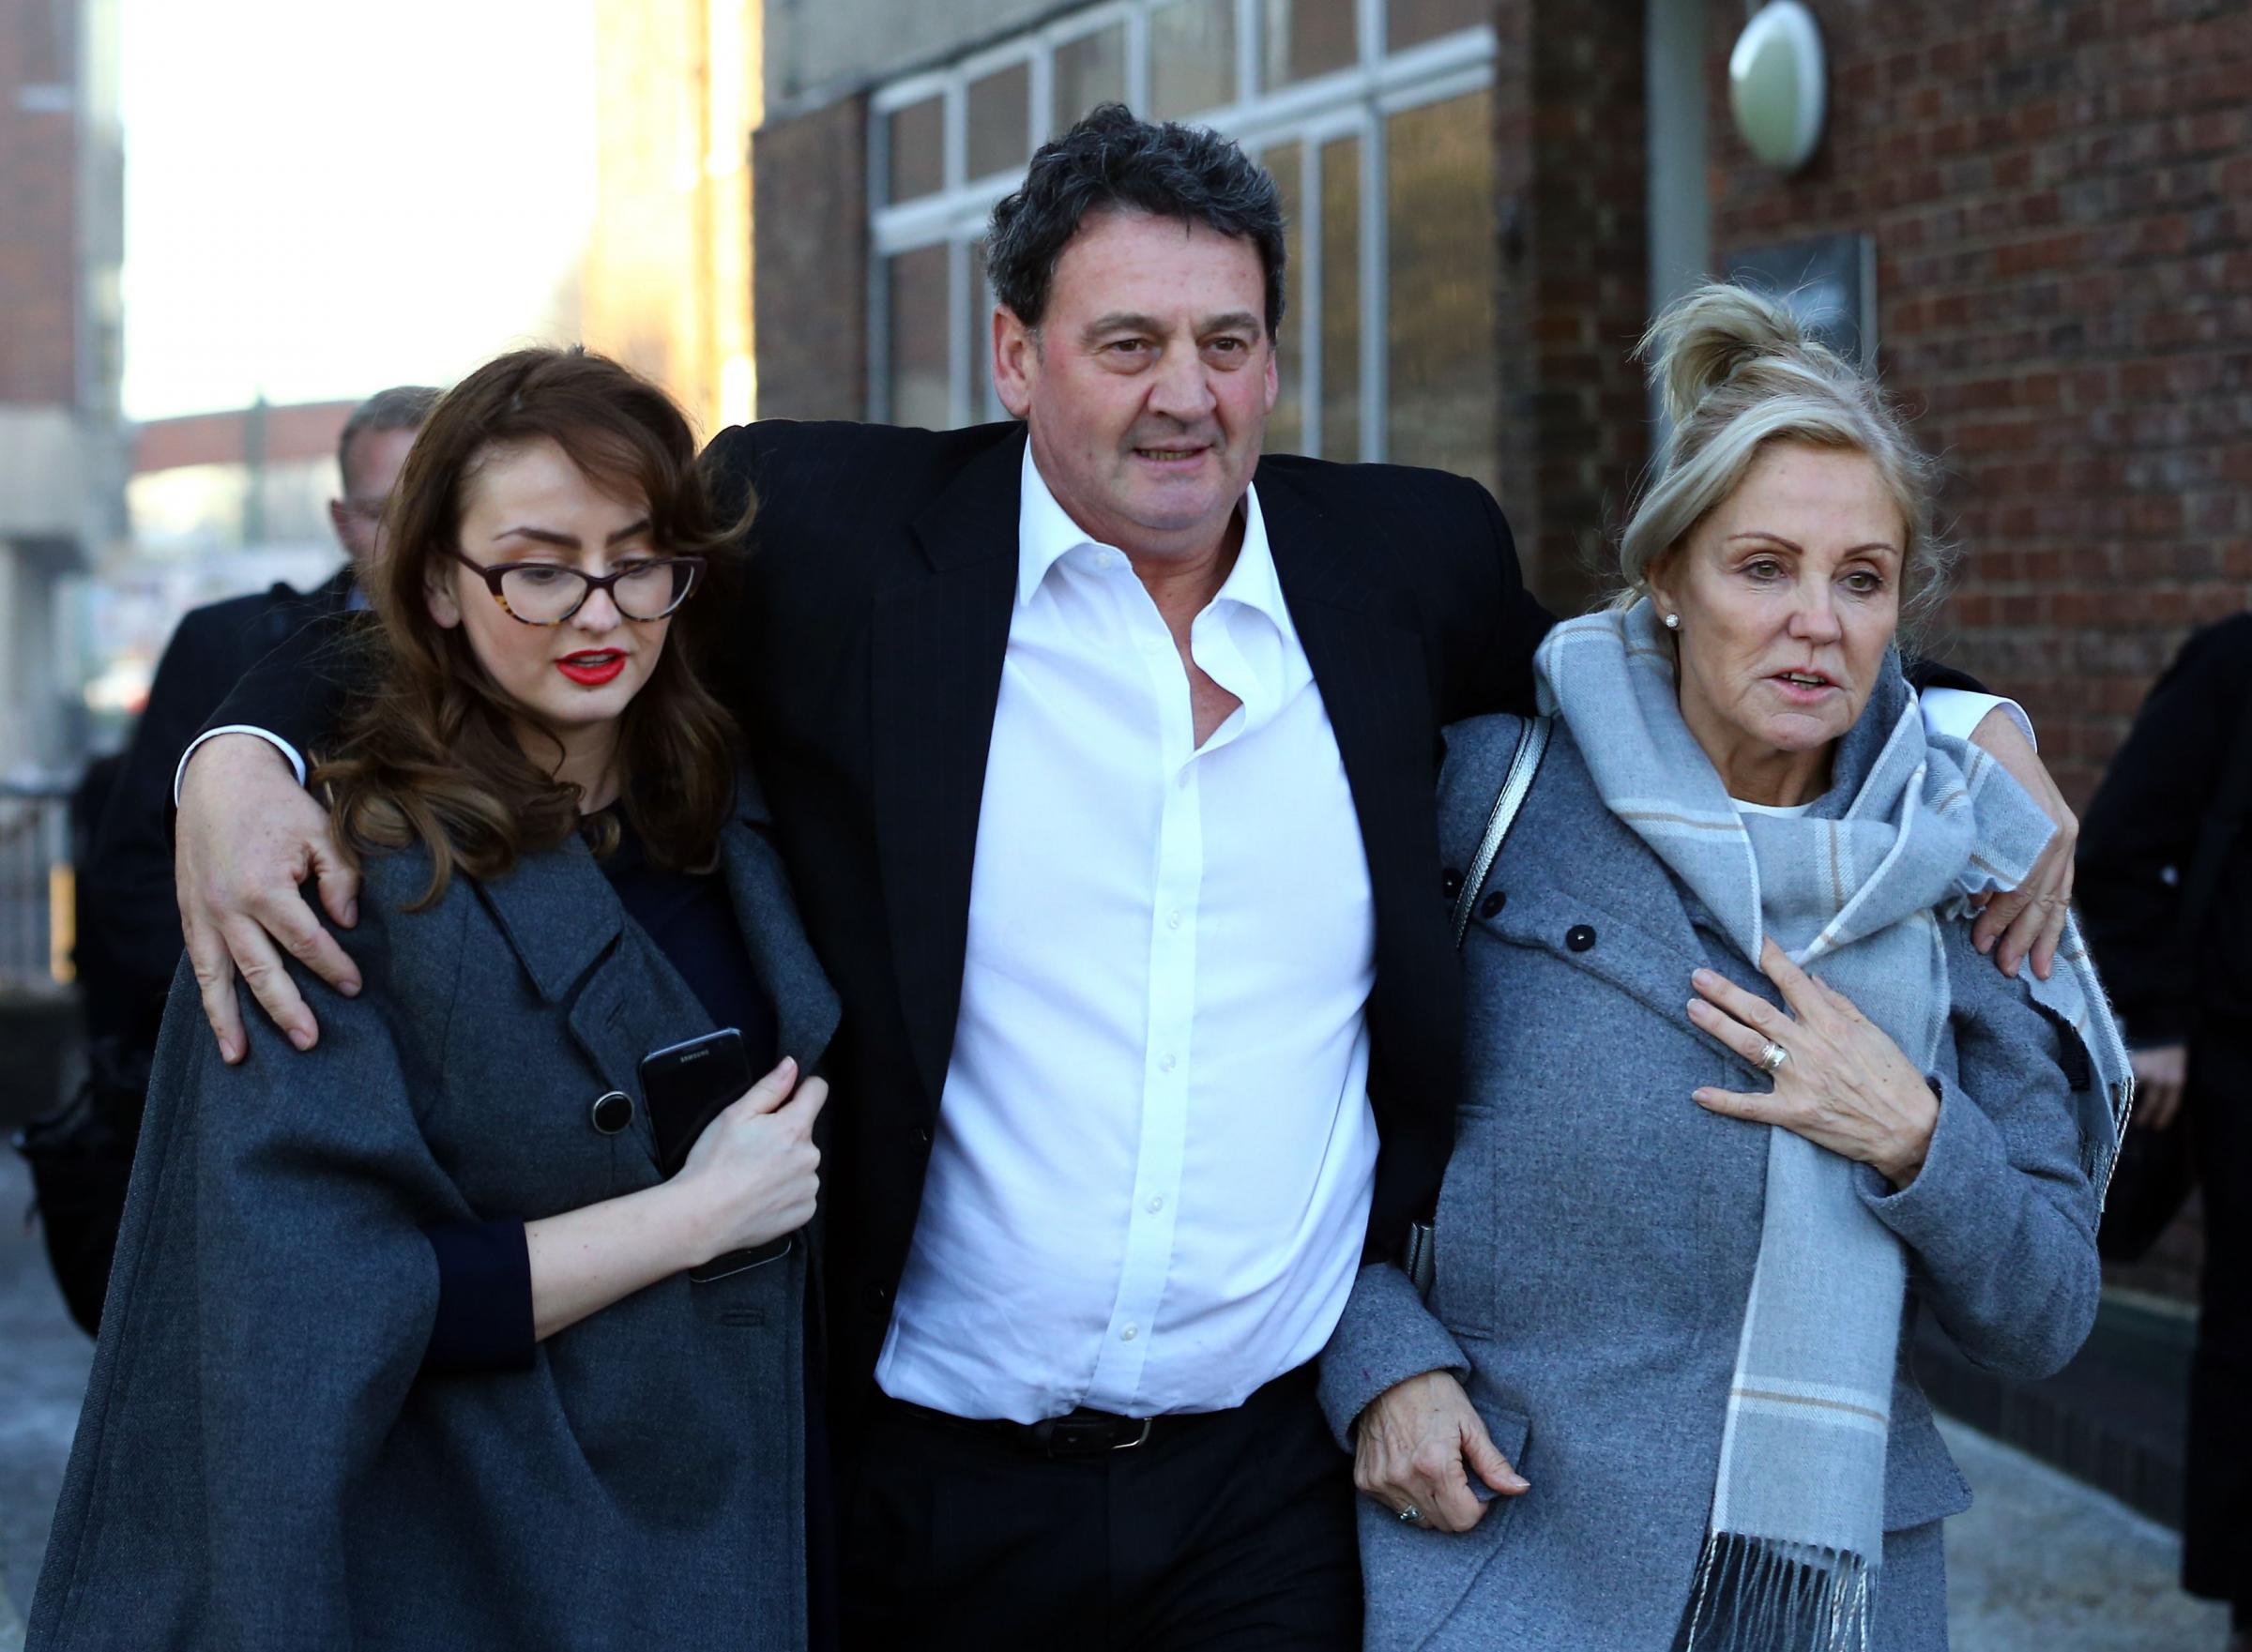 Paul Price, stepfather of Katie Price, found not guilty of rape